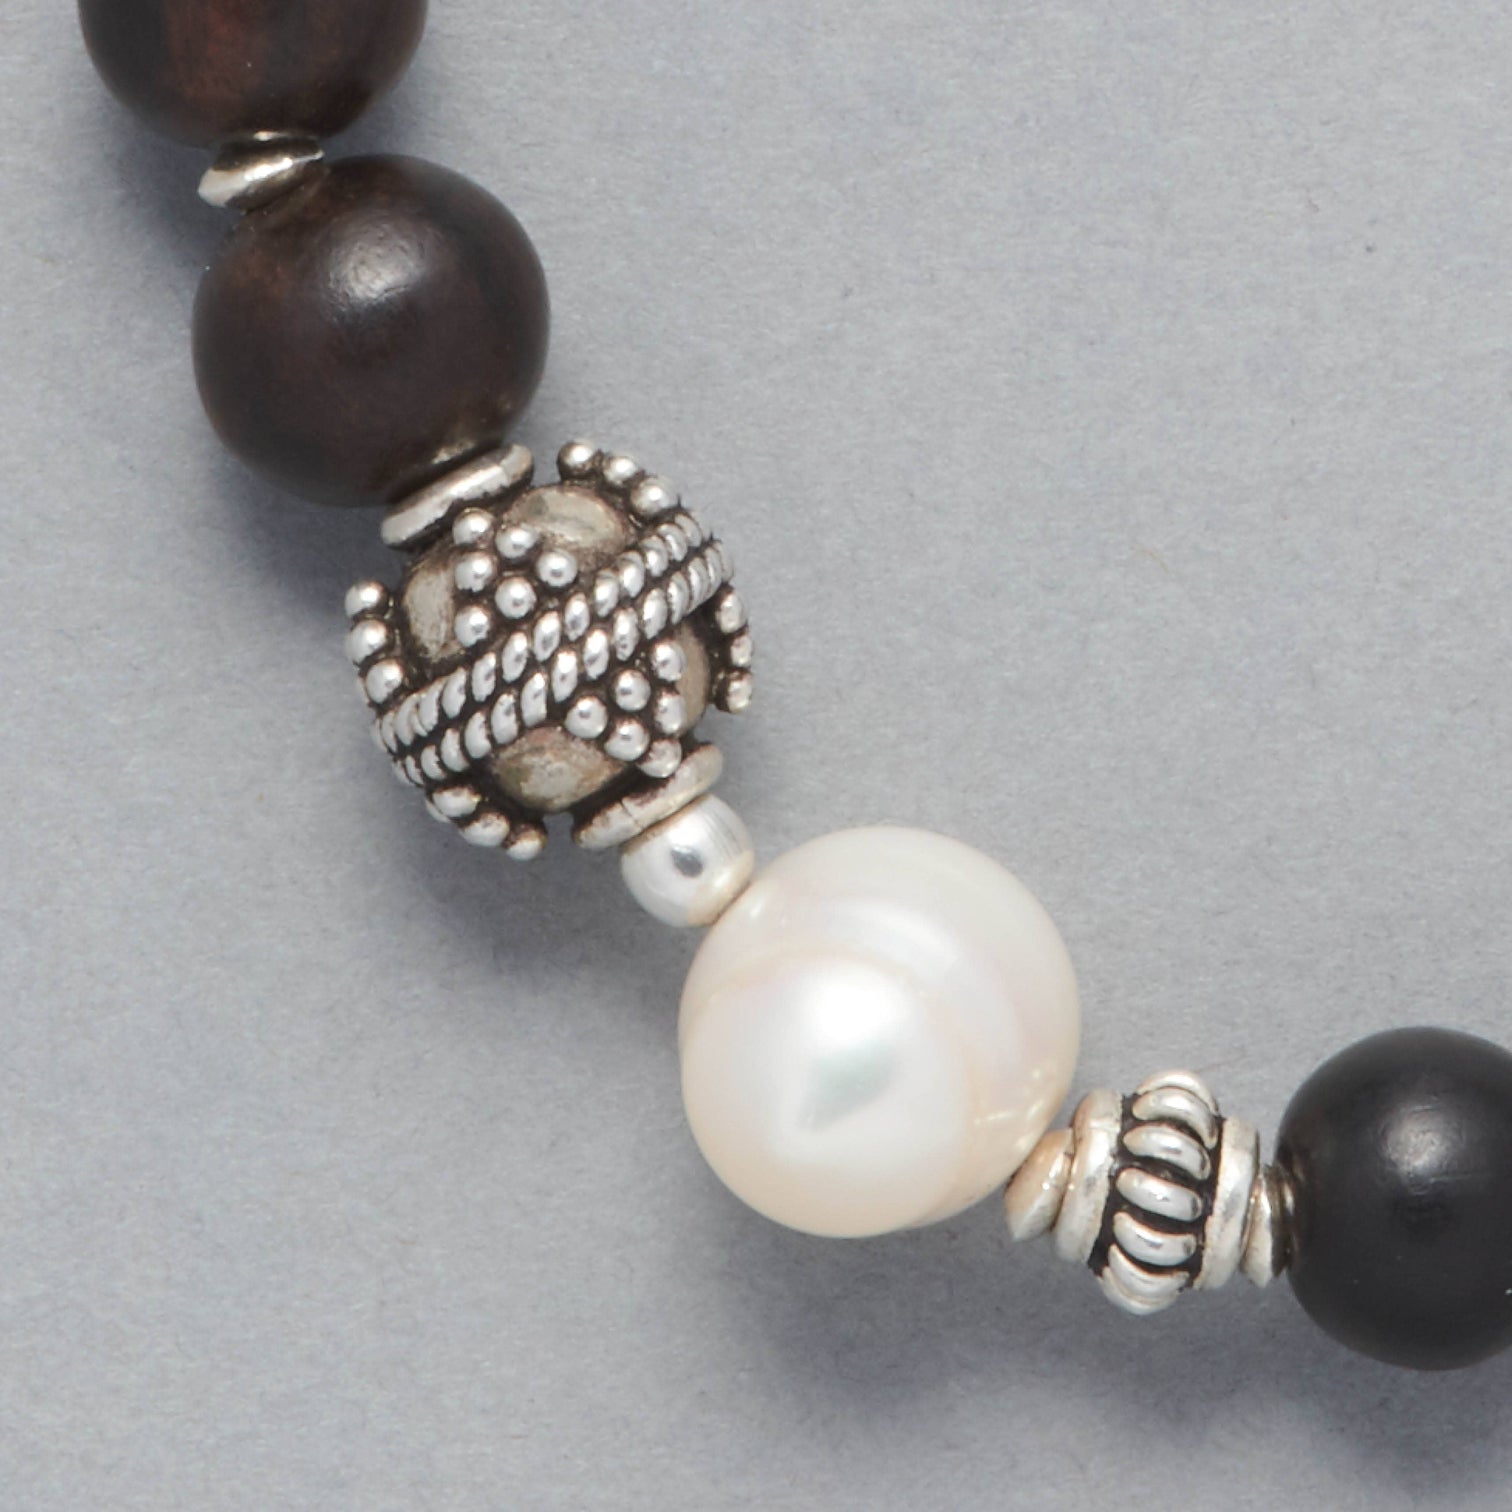 Close-up of the Ebony Bracelet made with Ebony Wood, a Cultured Freshwater Pearl and Sterling Silver Elements.